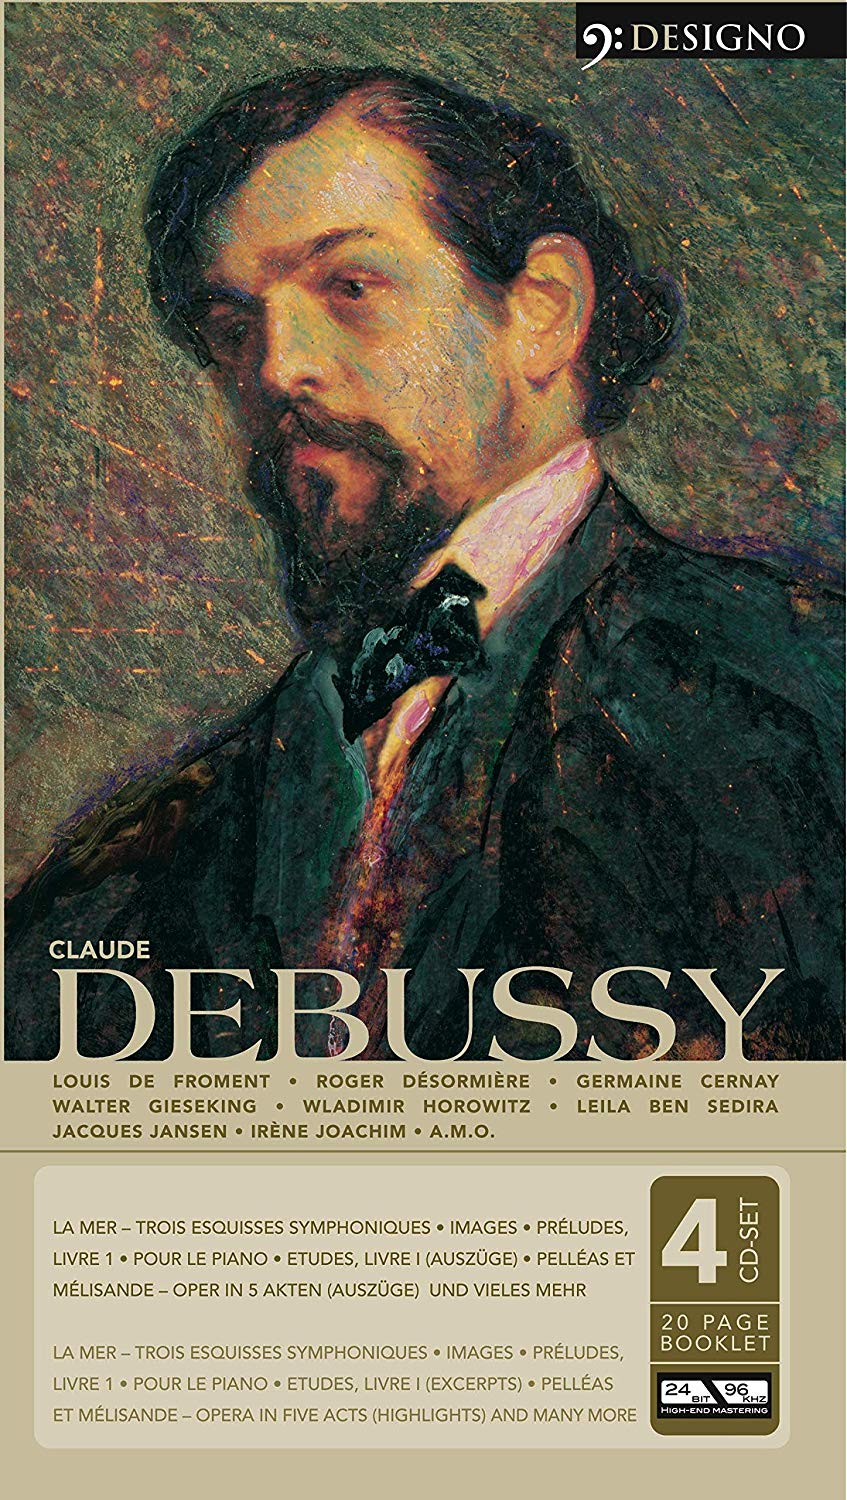 DEBUSSY: PIANO, ORCHESTRAL AND OPERA (4 CDS)